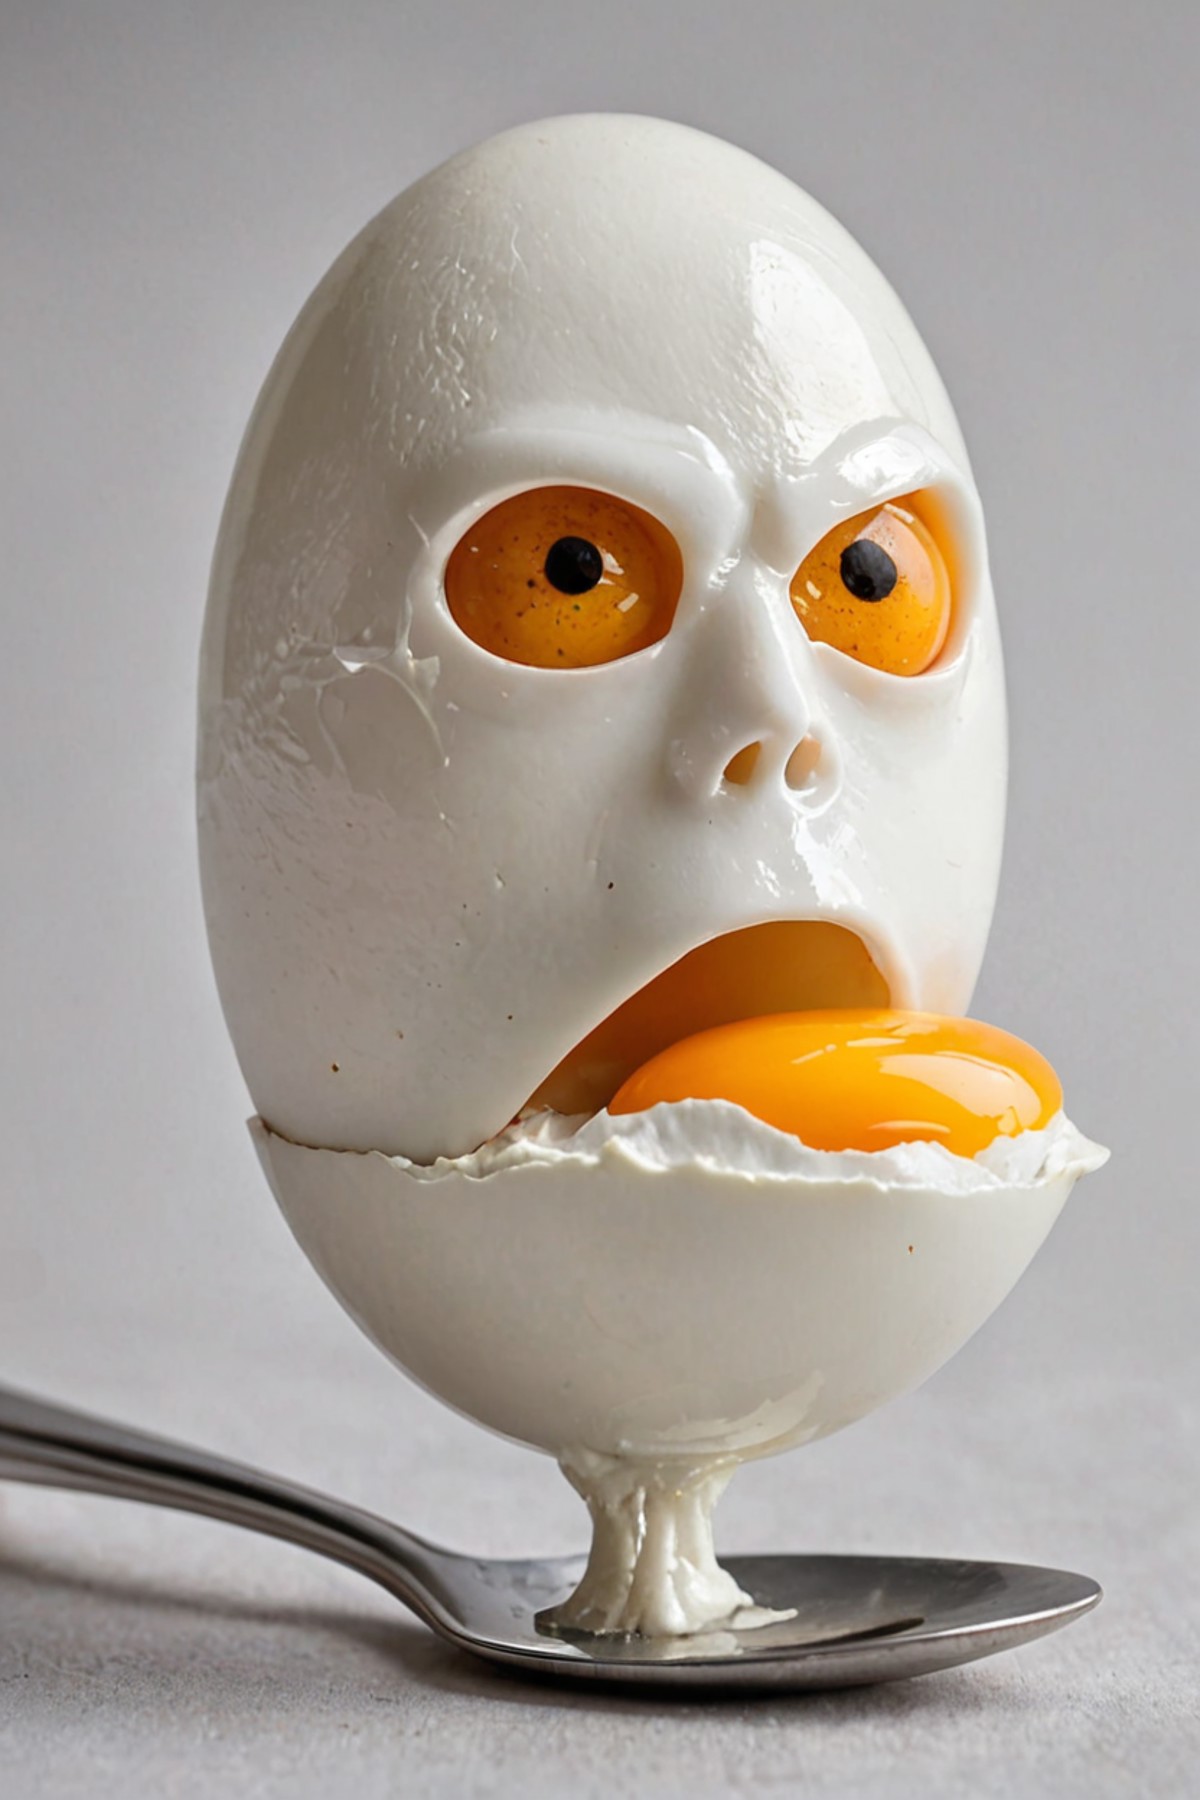 Boiled egg with shell,egg white,egg yolk and spoon sticking in egg looks like a human head,morph,photo realistic